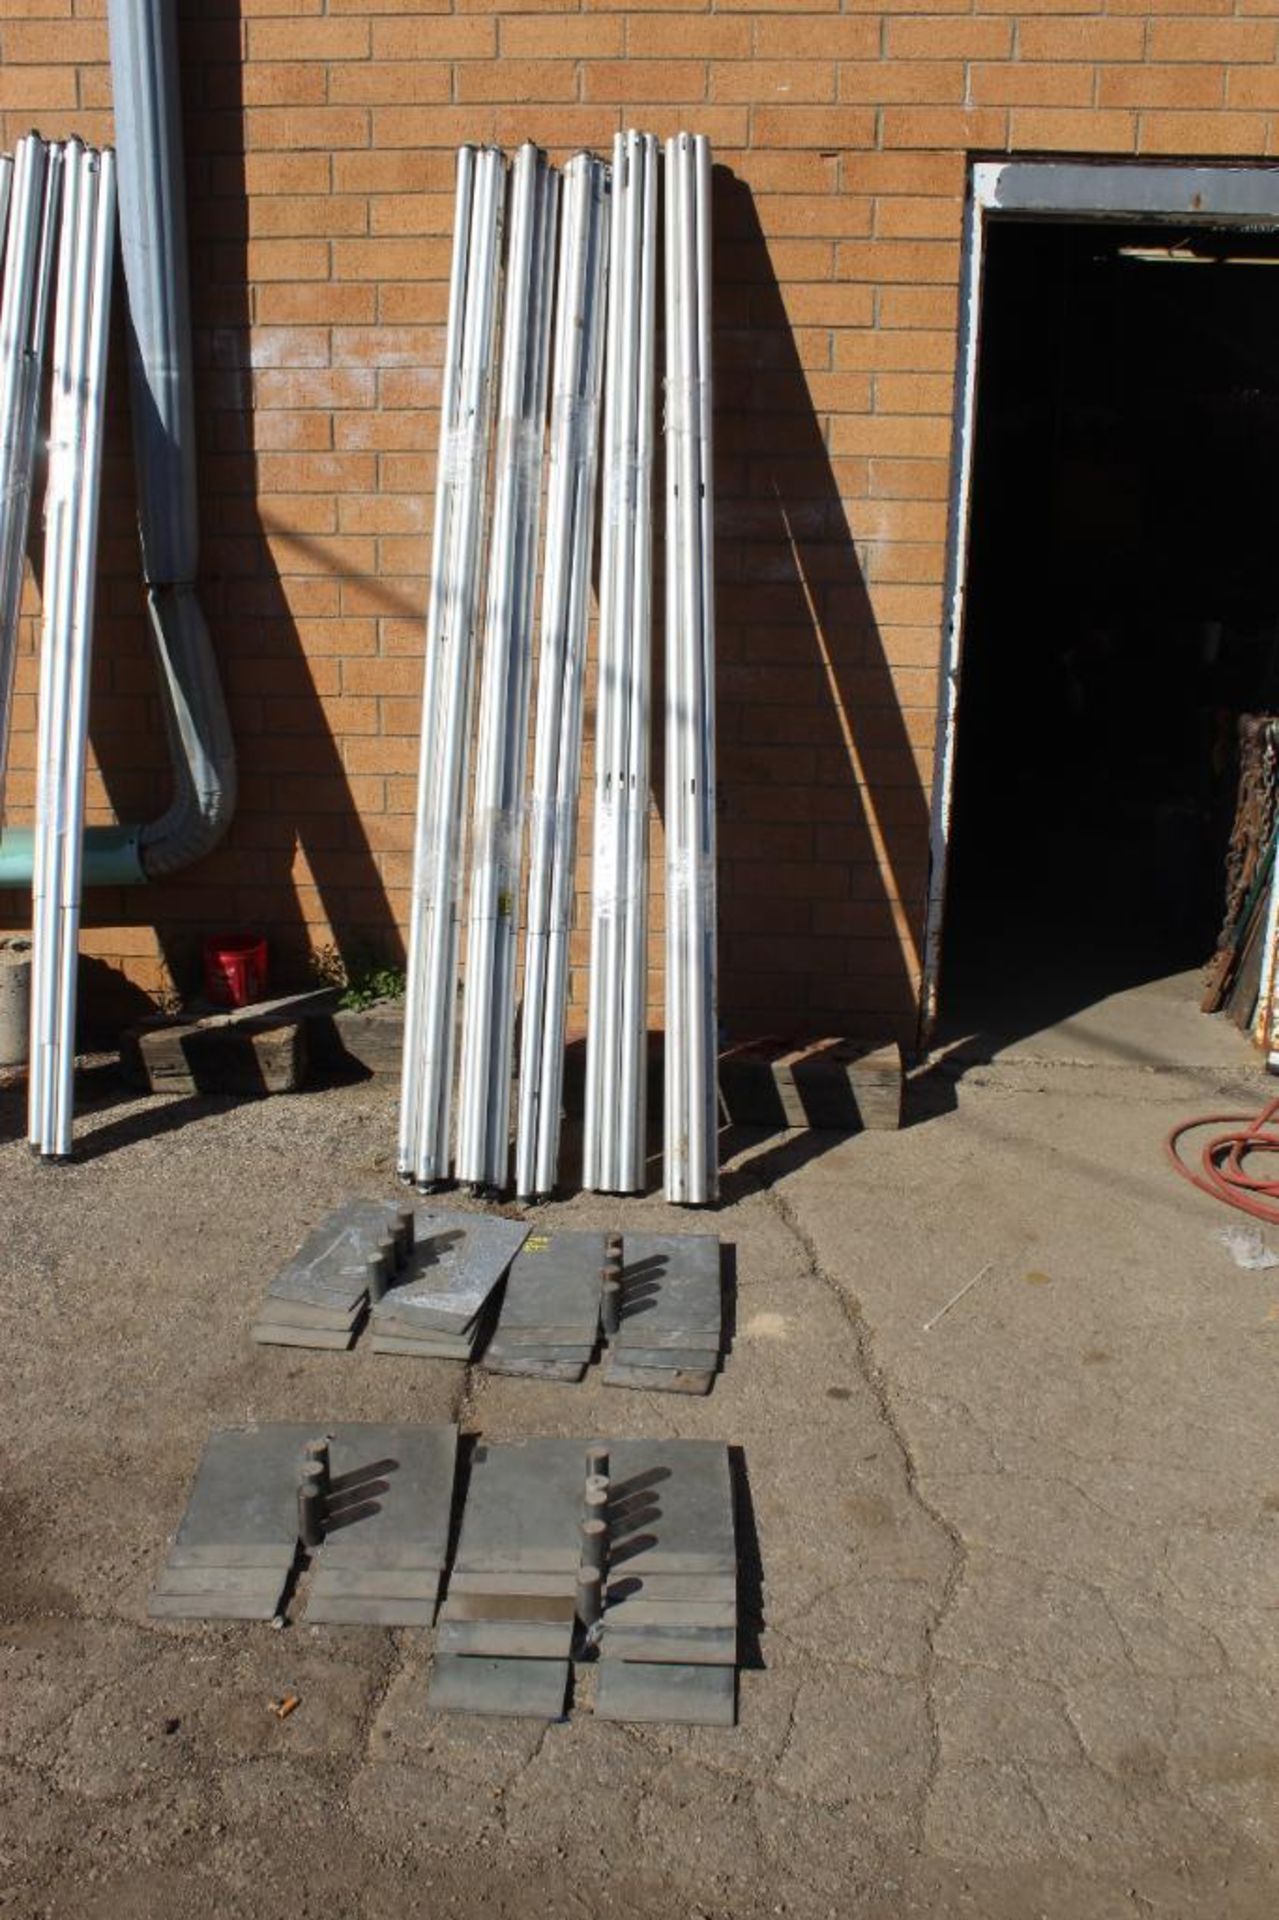 LOT: Pipe and Drape Pipes (13) 8 ft. Uprights, (15) Baseplates, (18) 6-10 ft. Cross Bars